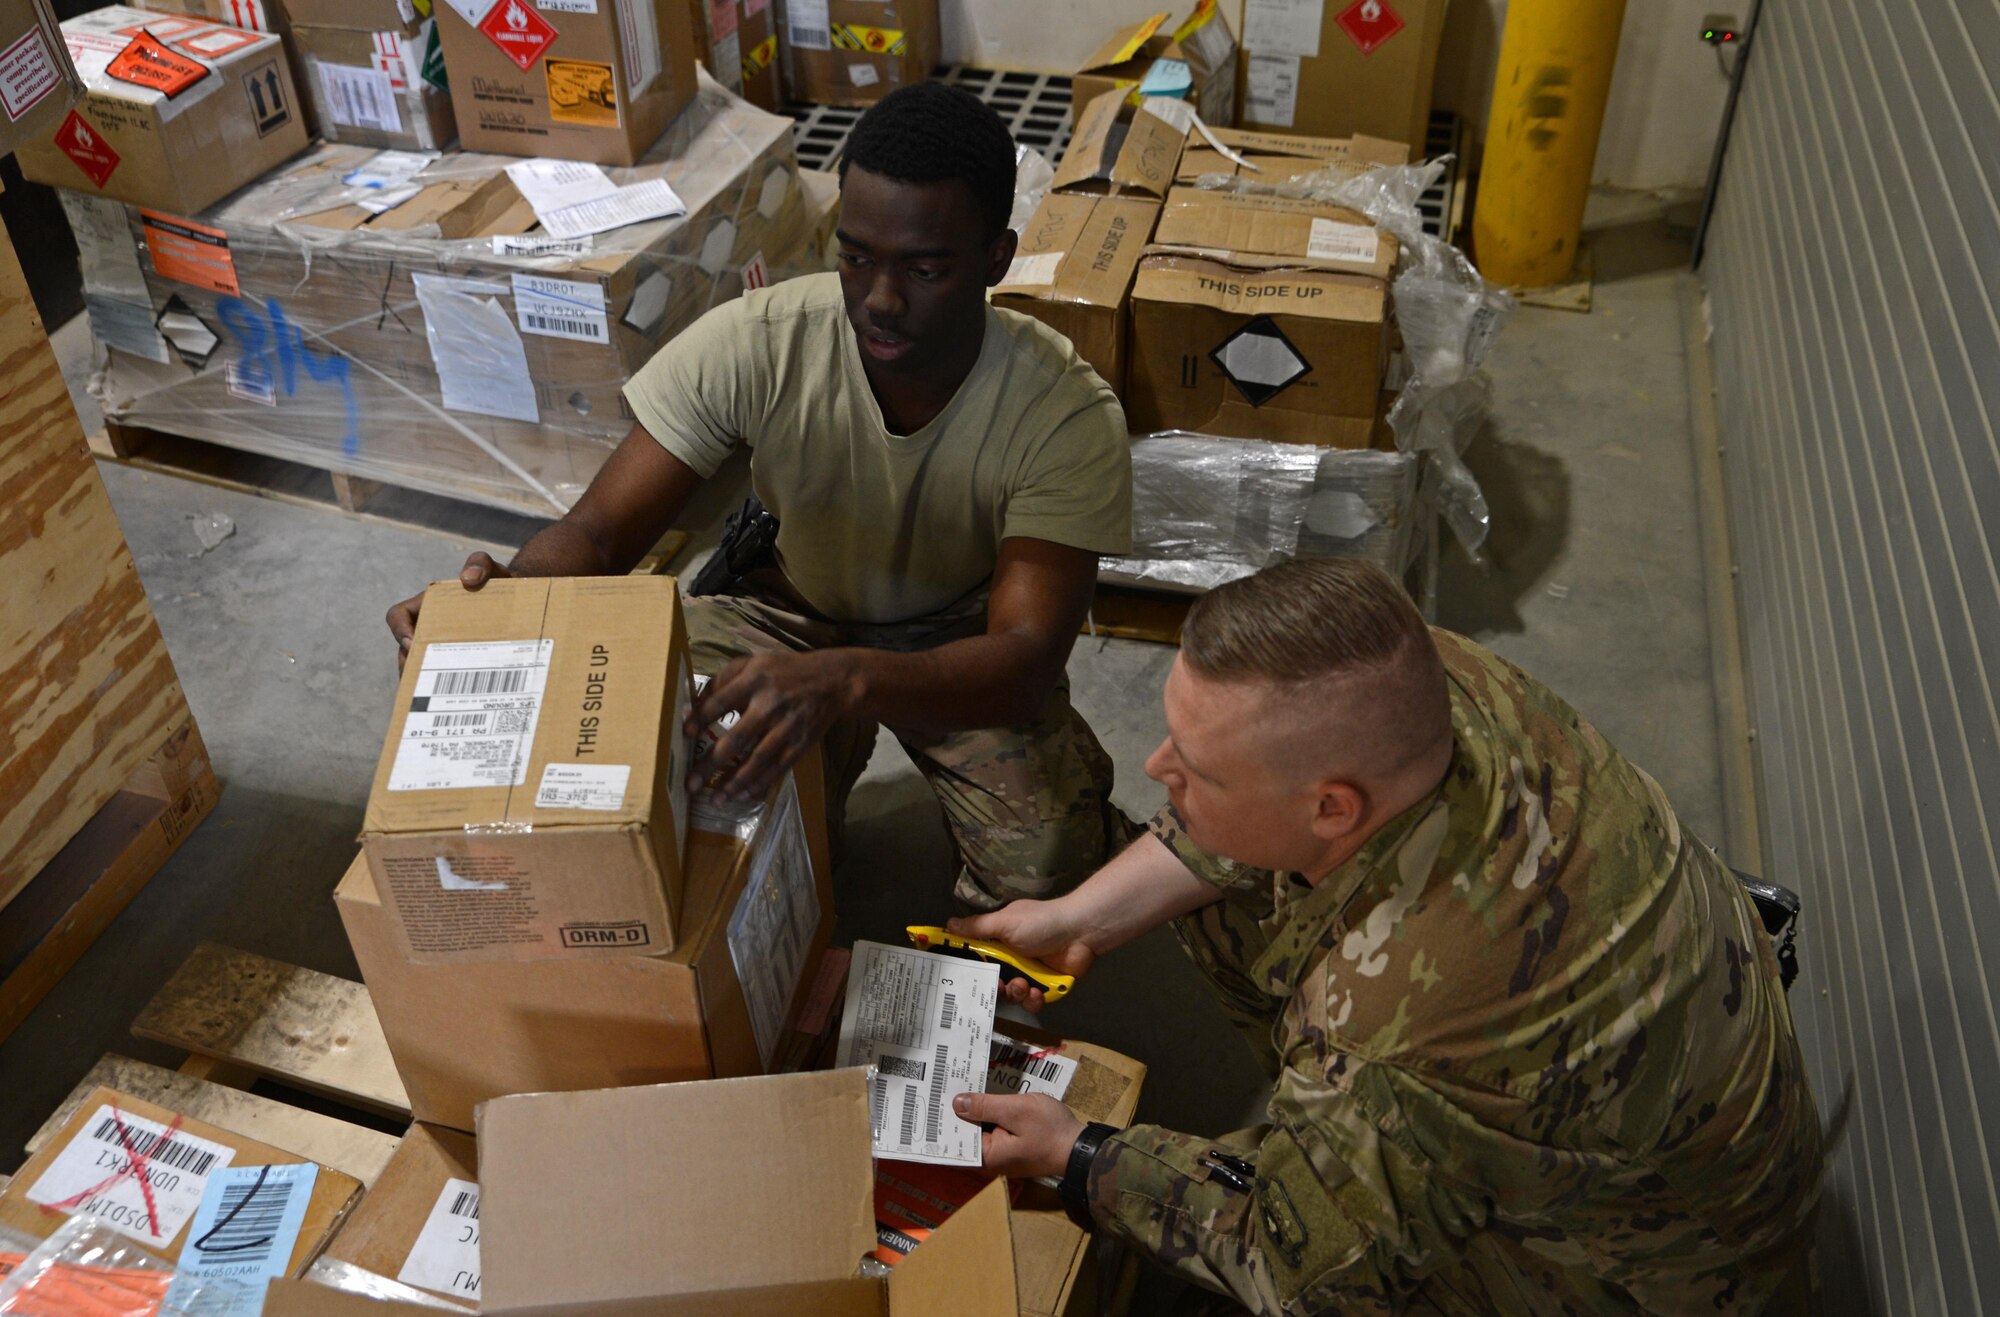 1st Lt. Joshua White (right), 455th Expeditionary Logistics Readiness Squadron officer, and Airman 1st Class Trevis Pridgen (center), 455th Expeditionary Logistics Readiness Squadron traffic management journeyman,  verifies the quantity of a product Nov. 4, 2017 at Bagram Airfield, Afghanistan.